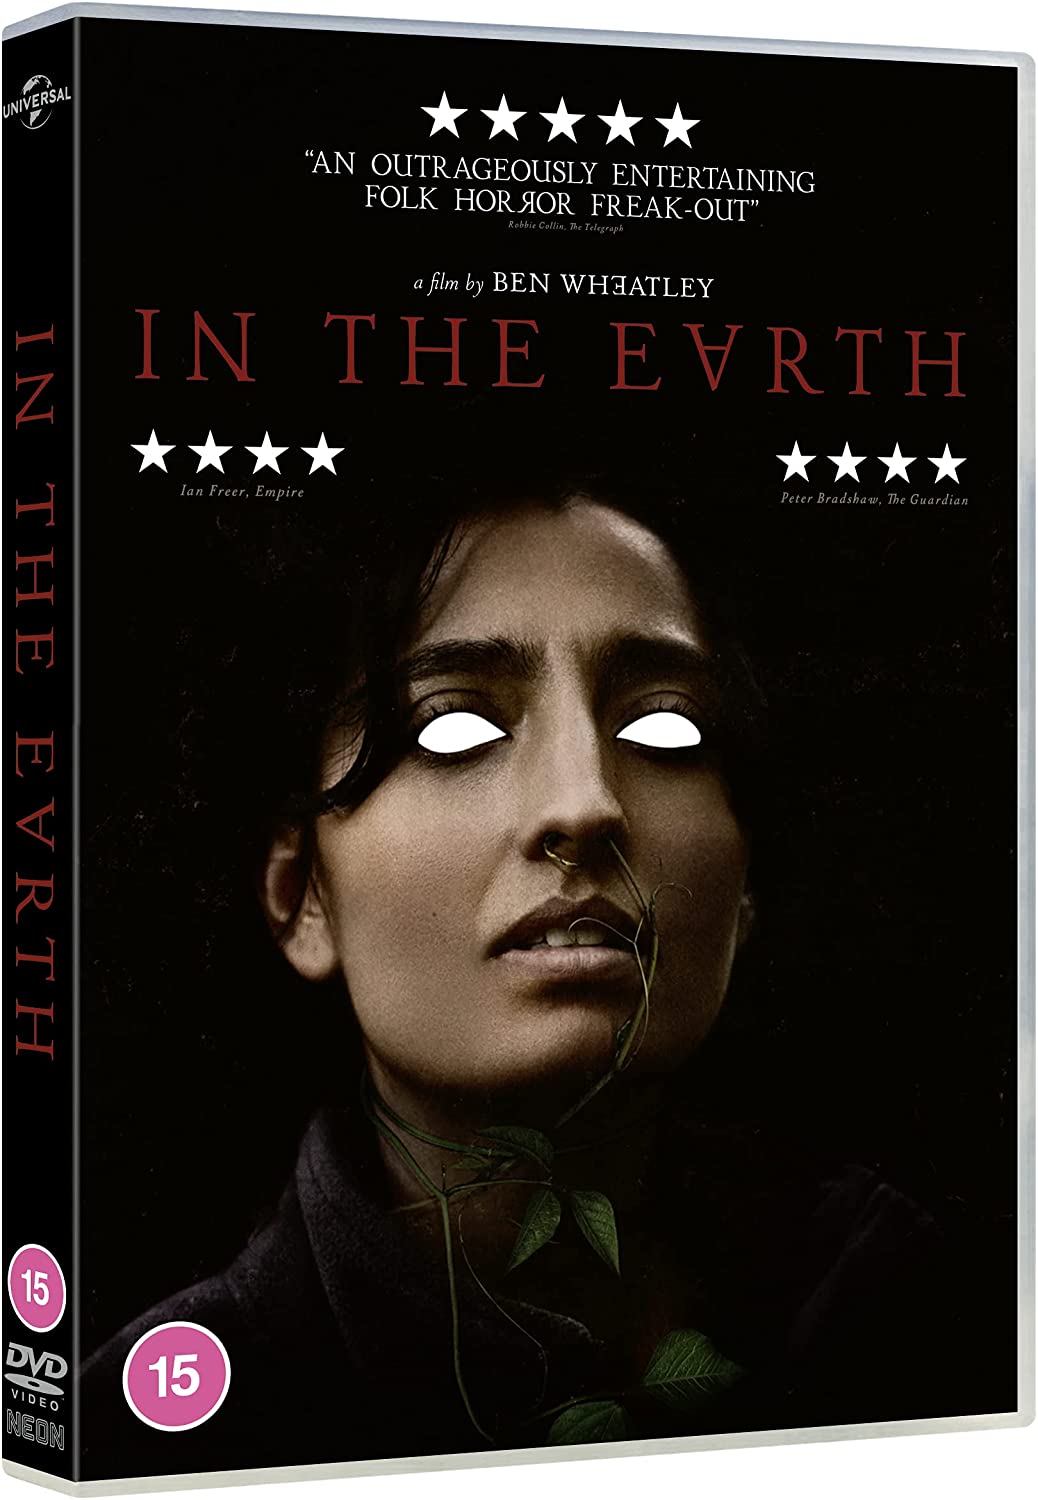 INTHEEARTHDVD